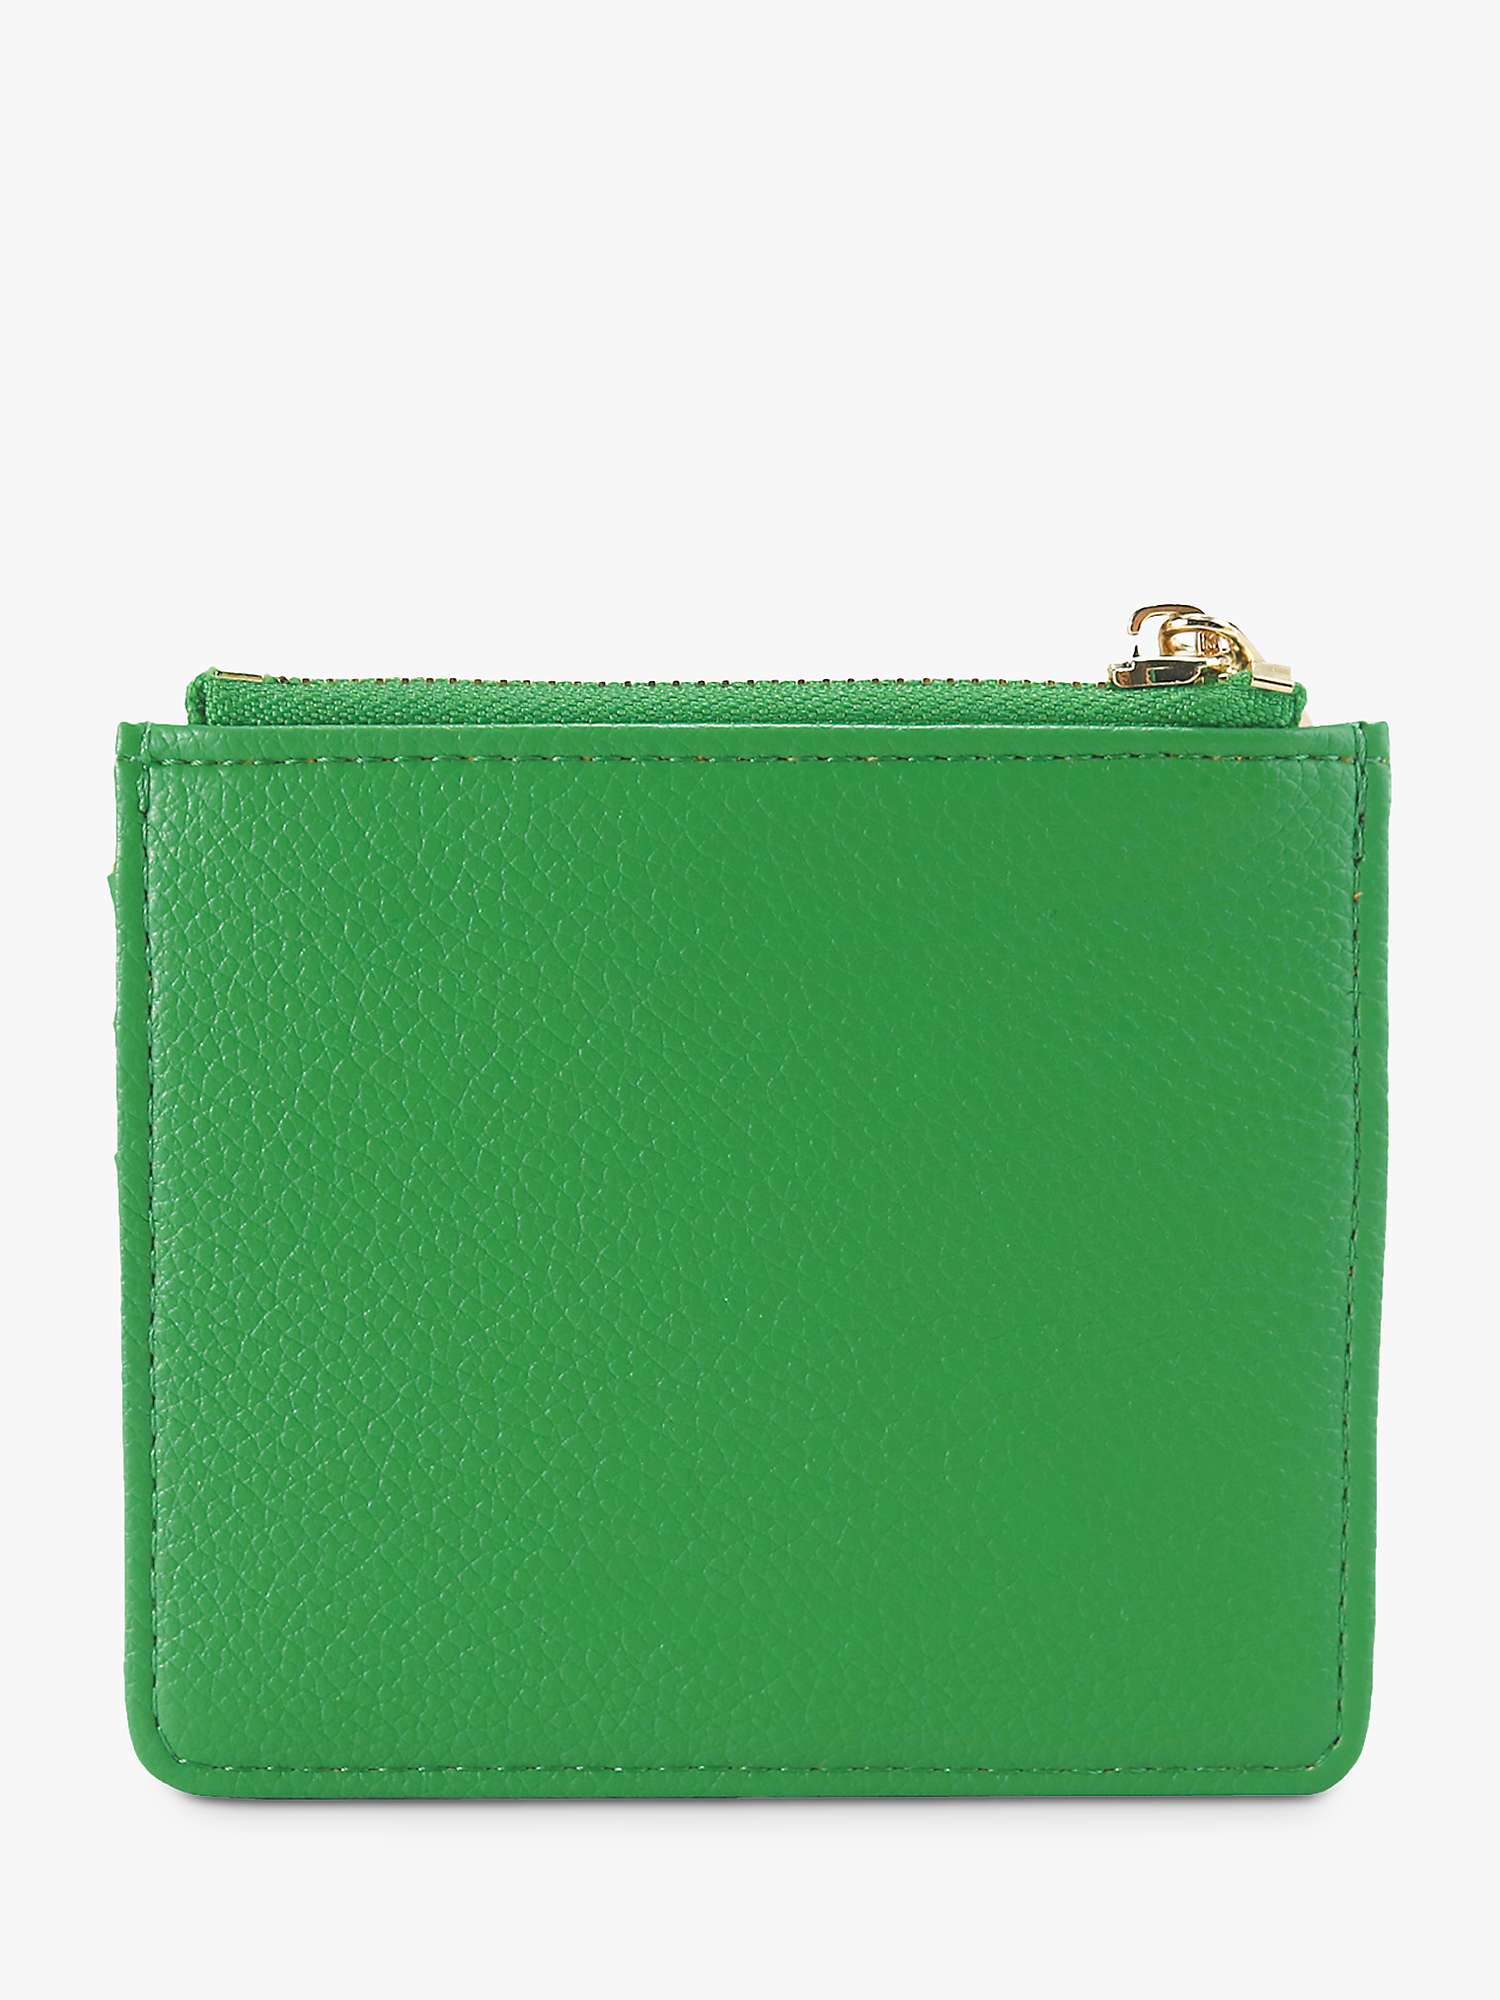 Buy Fenella Smith Daisy Card Holder & Coin Purse Online at johnlewis.com